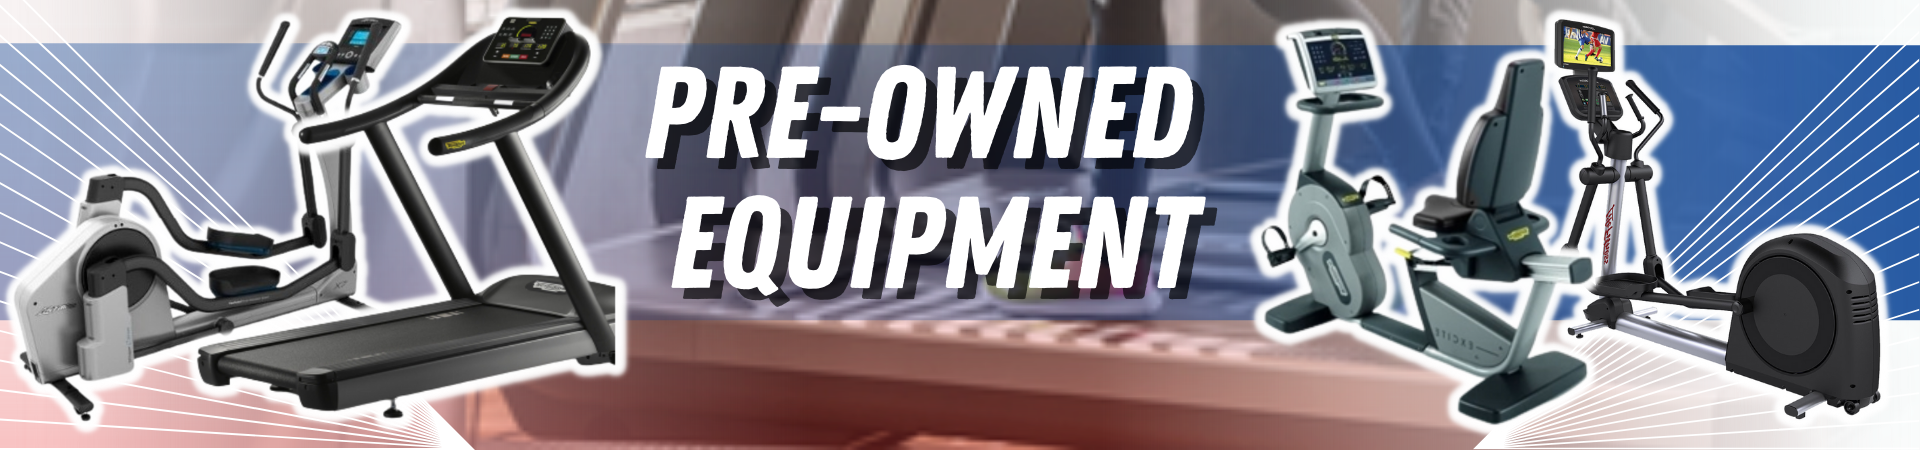 PRE-OWNED EQUIPMENT